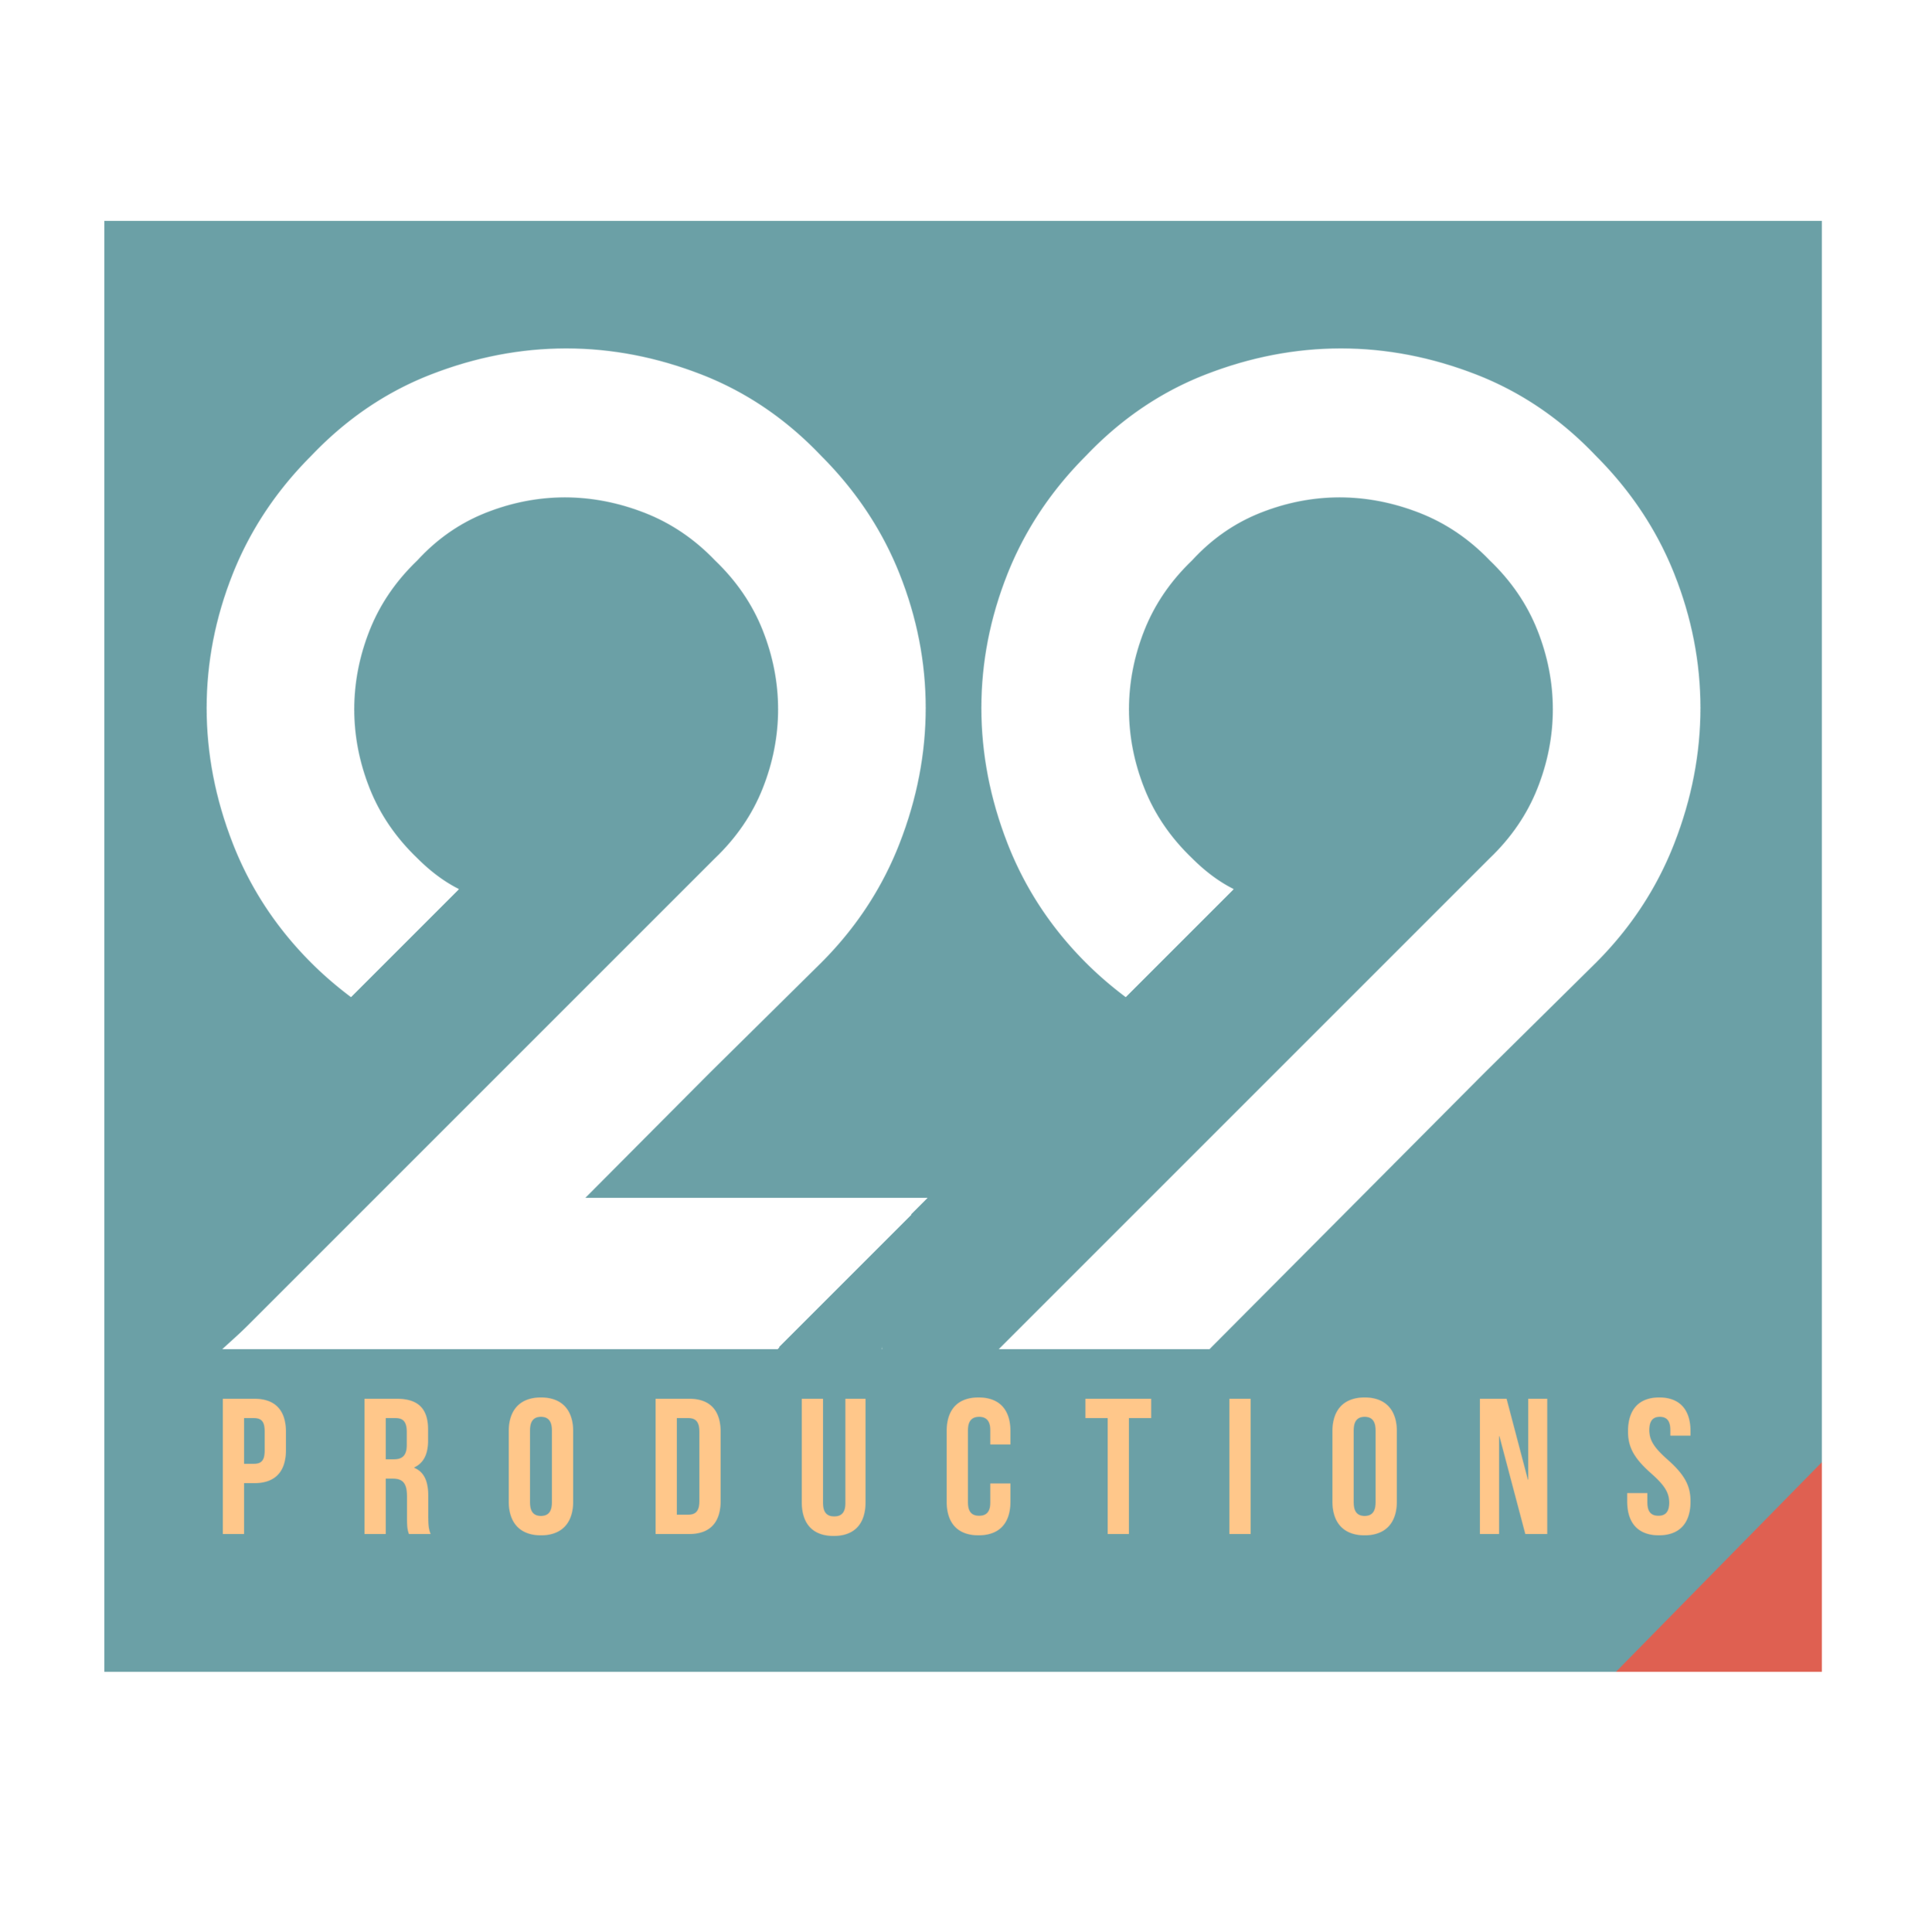 29 Productions